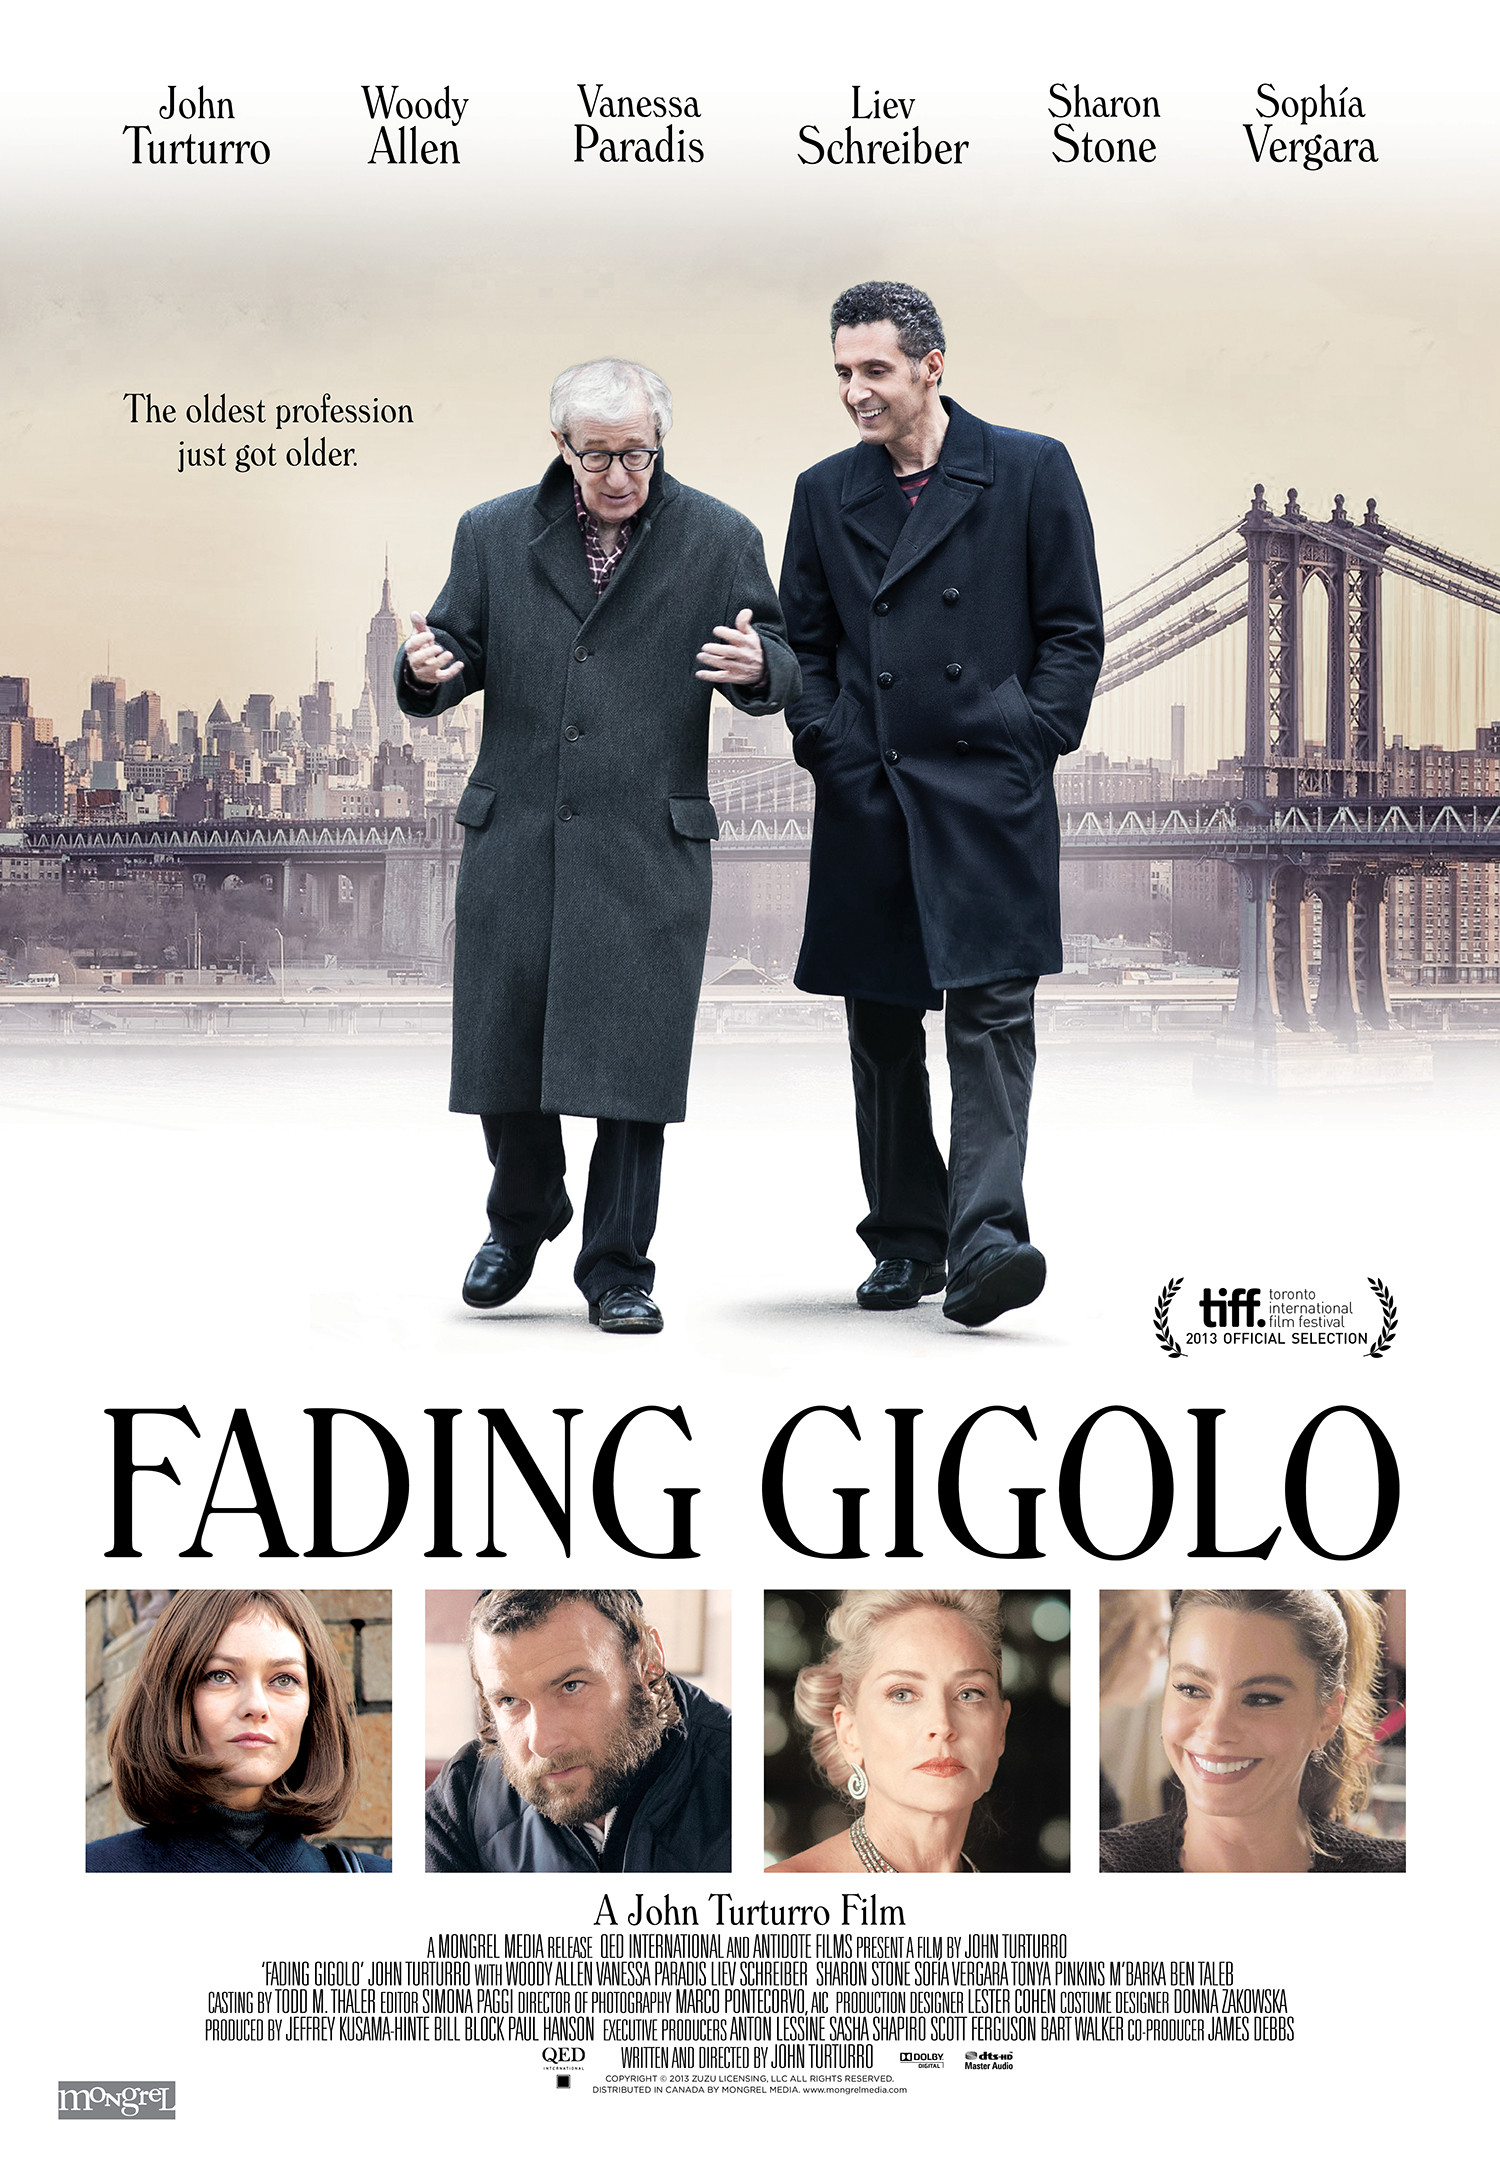 New Fading Gigolo US Poster – The Woody Allen Pages